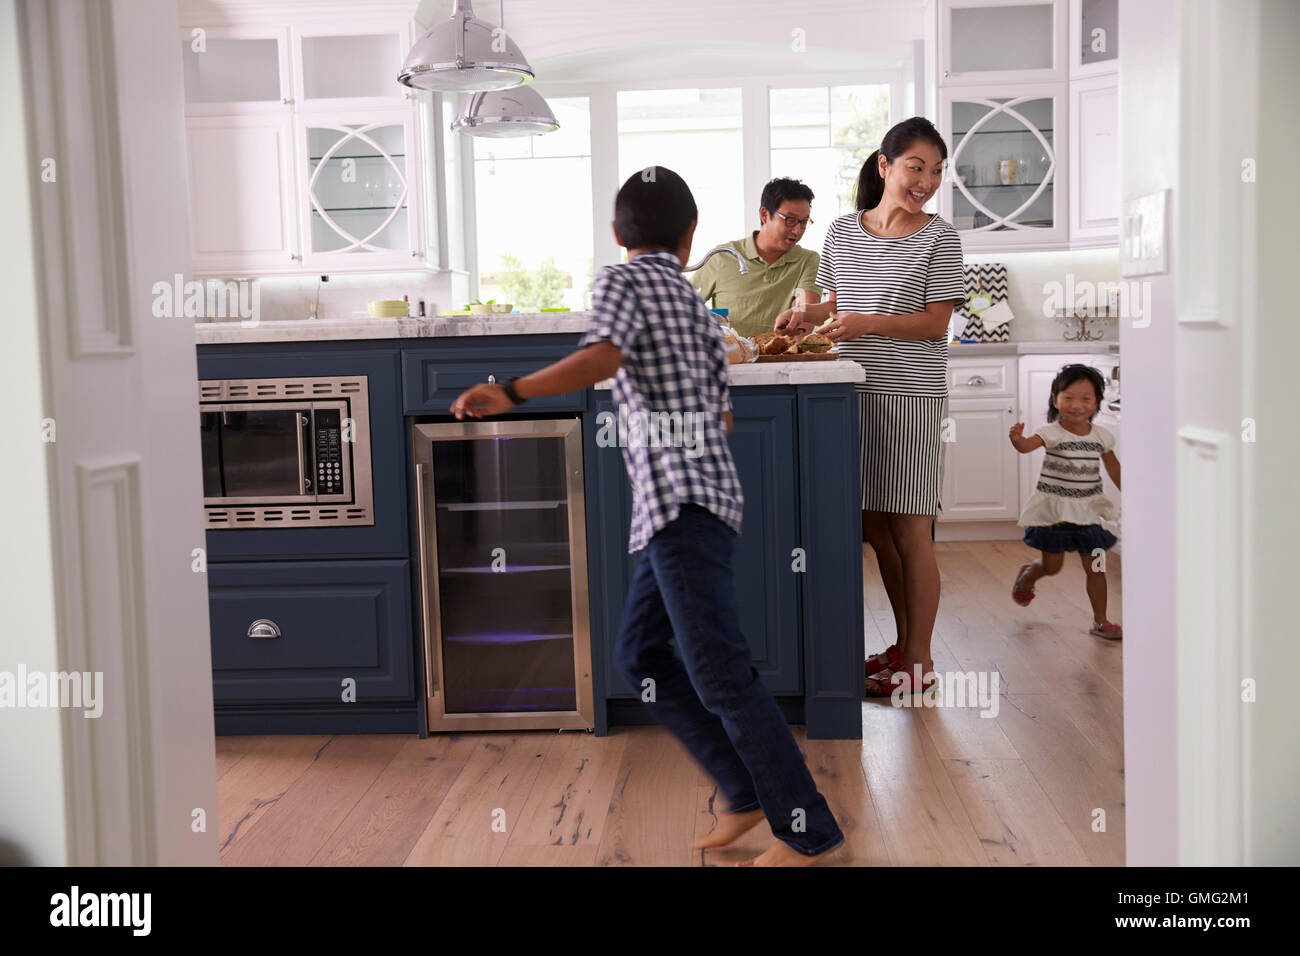 Parents Prepare Food As Children Play In Kitchen Stock Photo